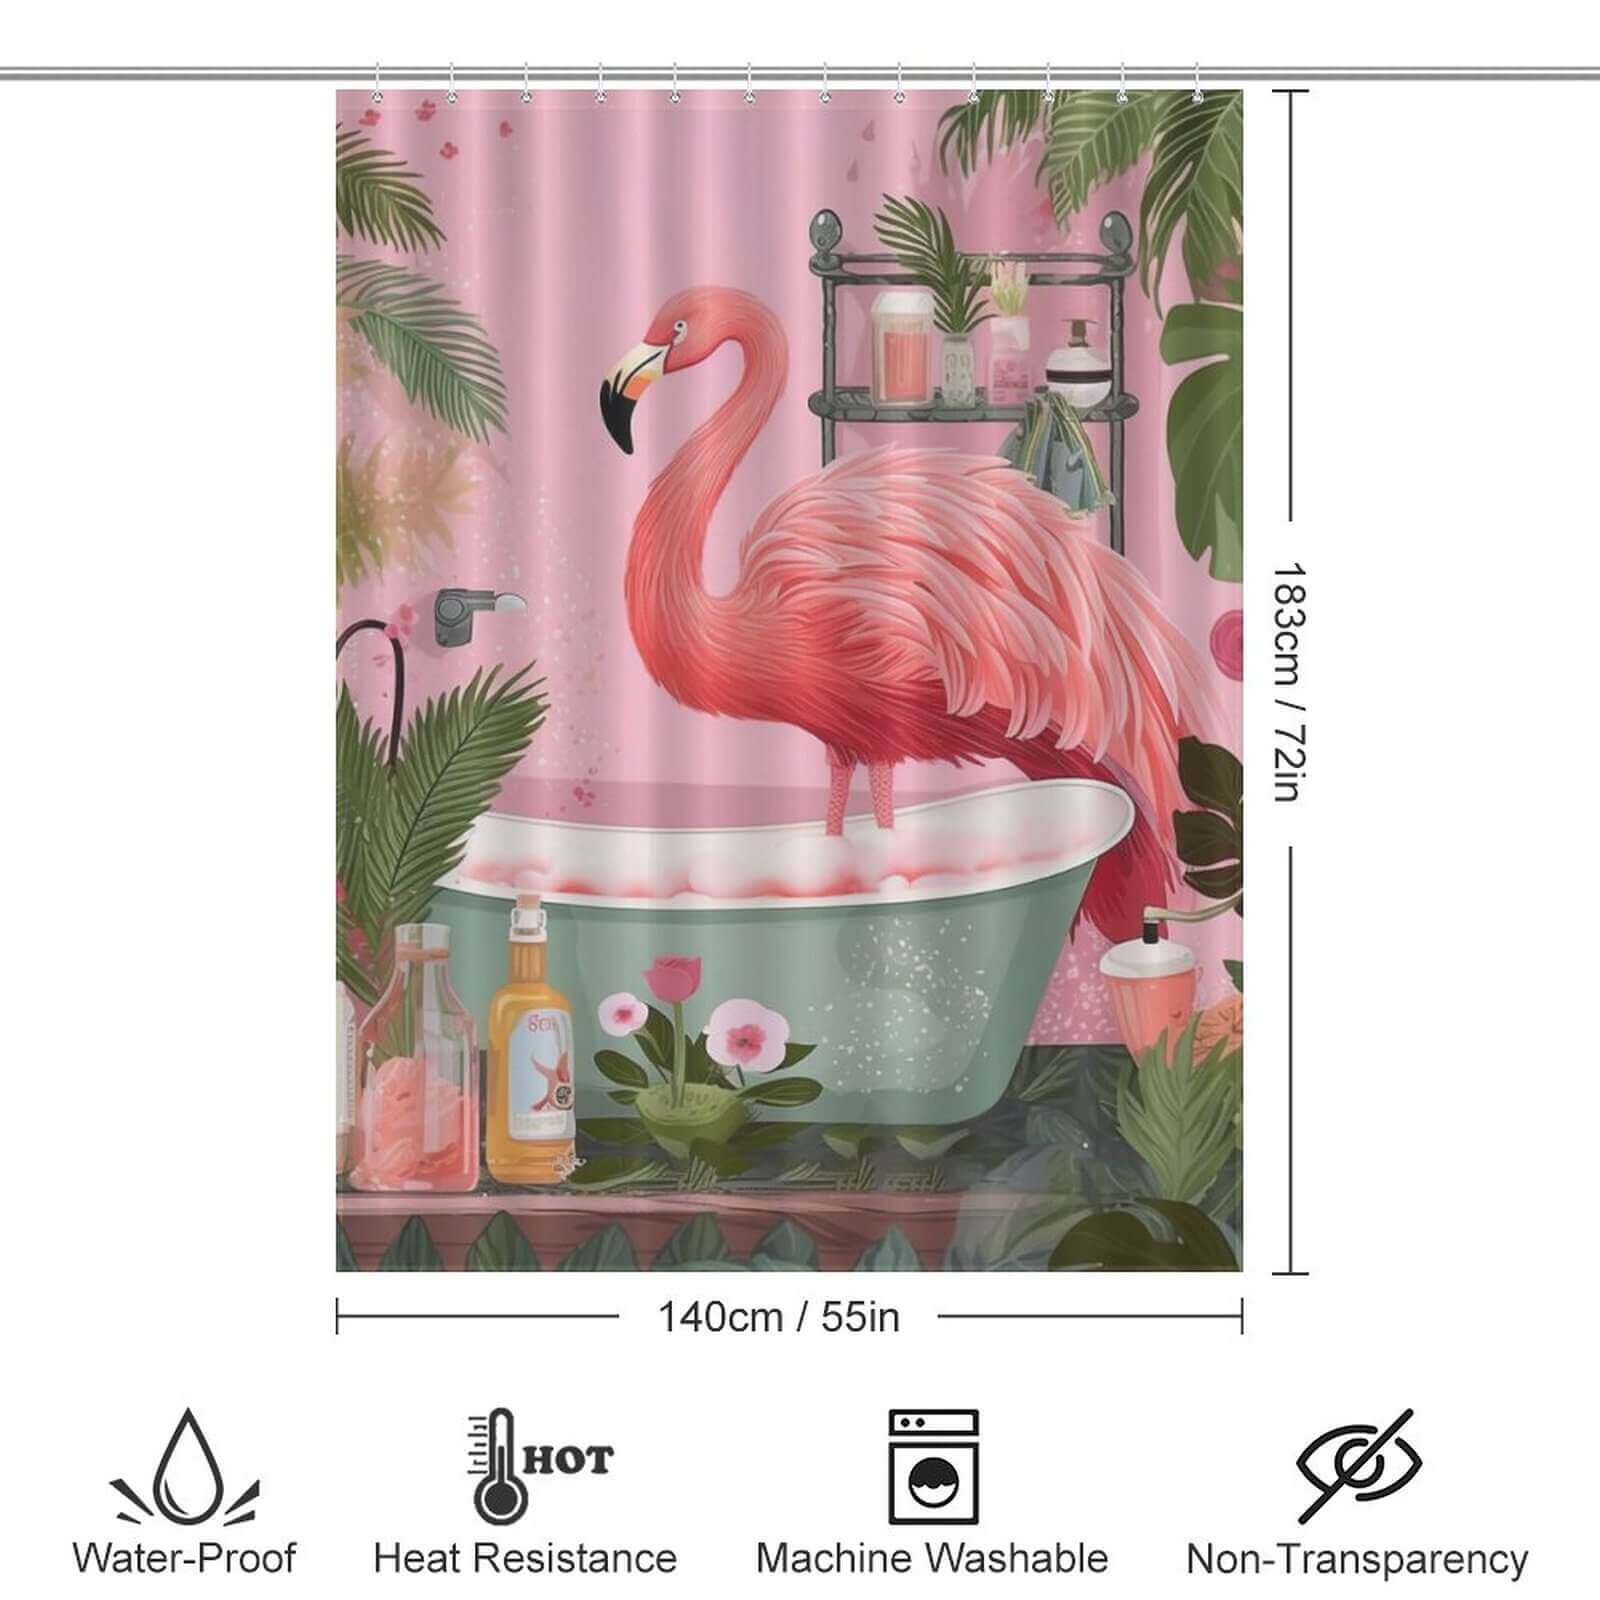 Waterproof Boho Tropical Flamingo shower curtain by Cotton Cat for your bathroom.